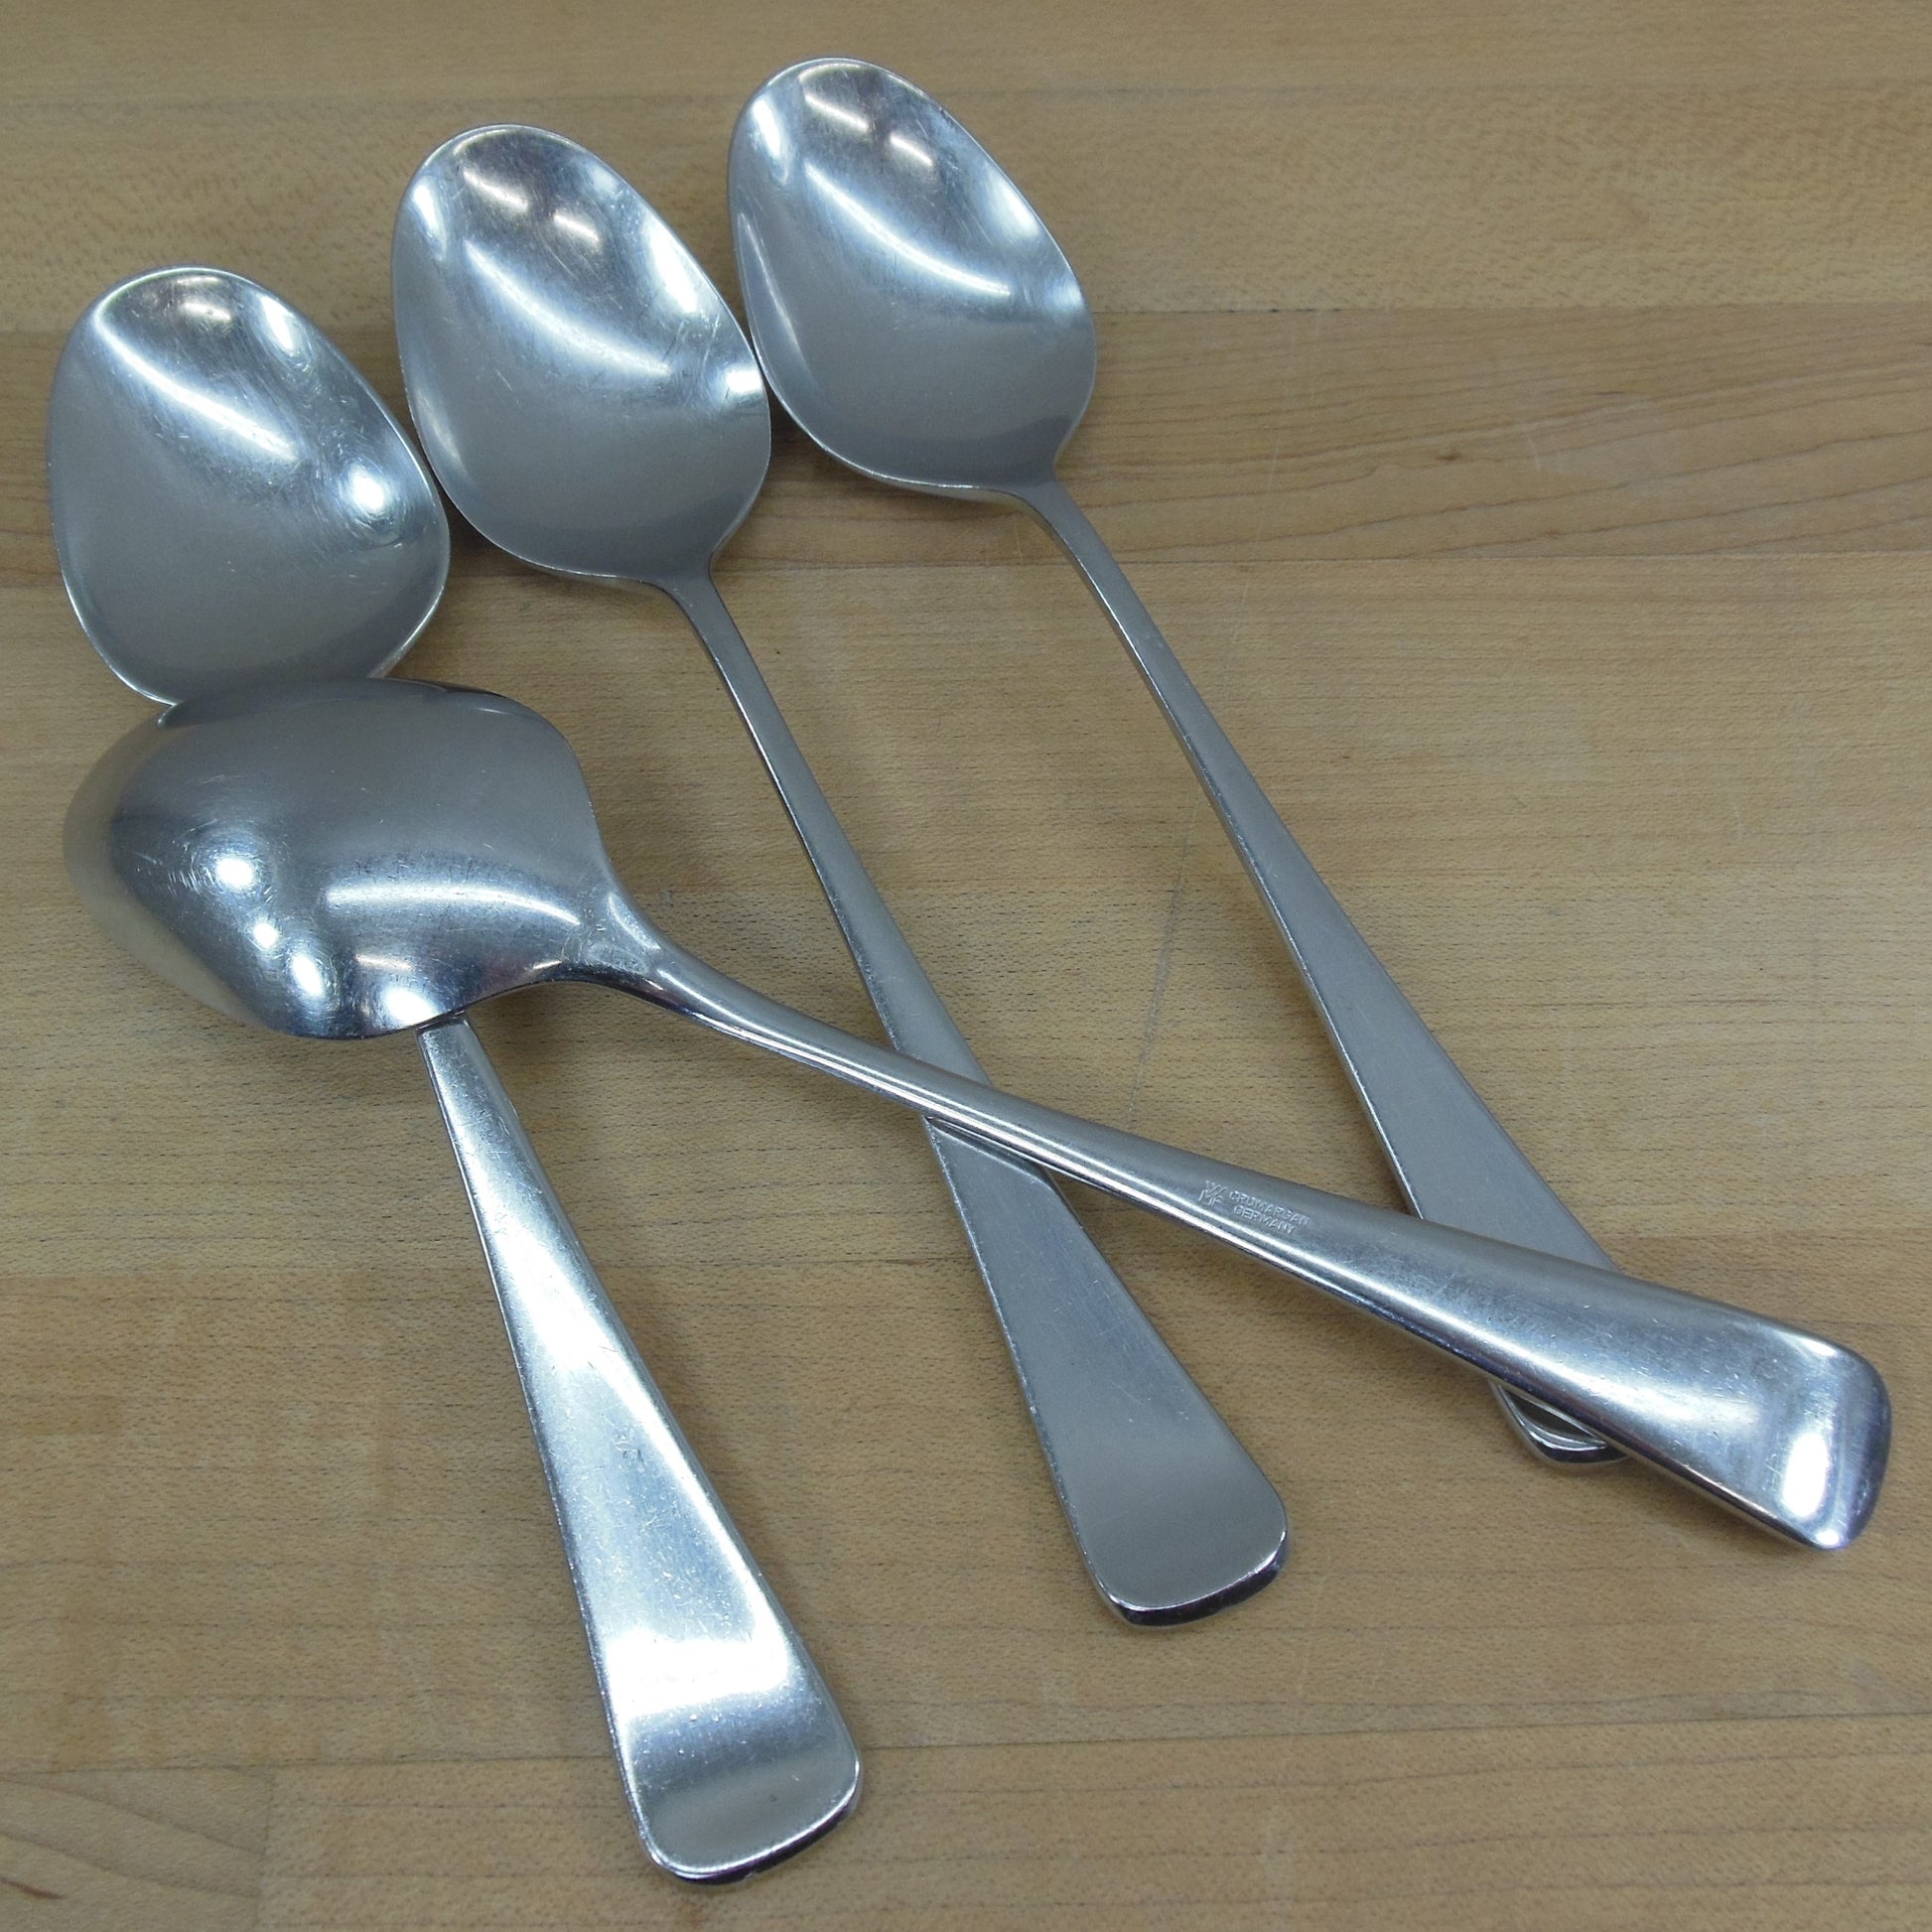 WMF Germany Cromargan Stainless Finesse Flatware - 4 Set Place Spoons used